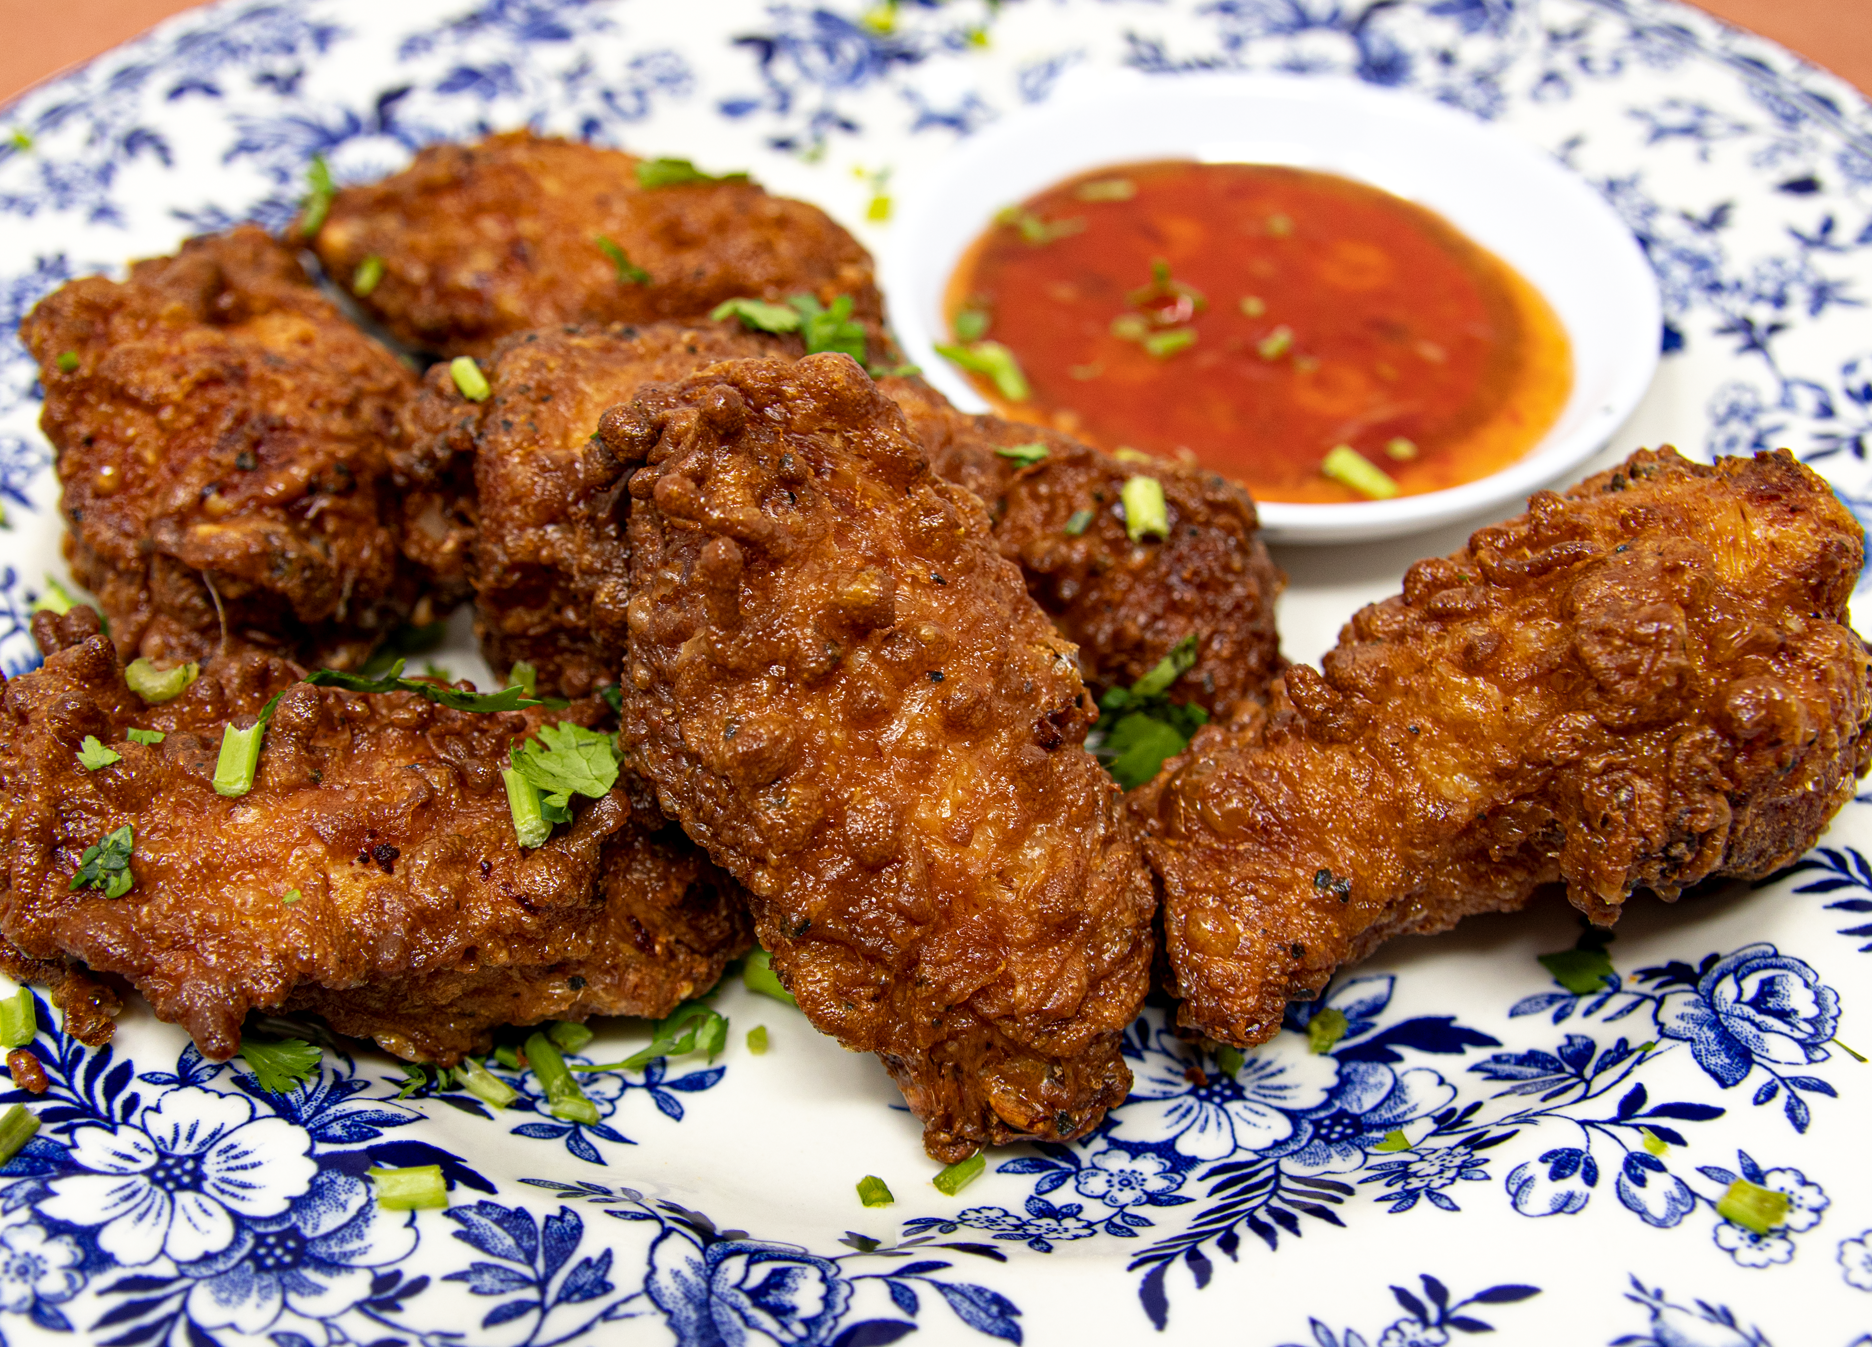 Shaoxing Wine, Soy, Ginger, Sesame Marinated Chicken Wings served with Mai Ploy Sweet Chili Sauce (6 wings per order)  This Product contains GLUTEN